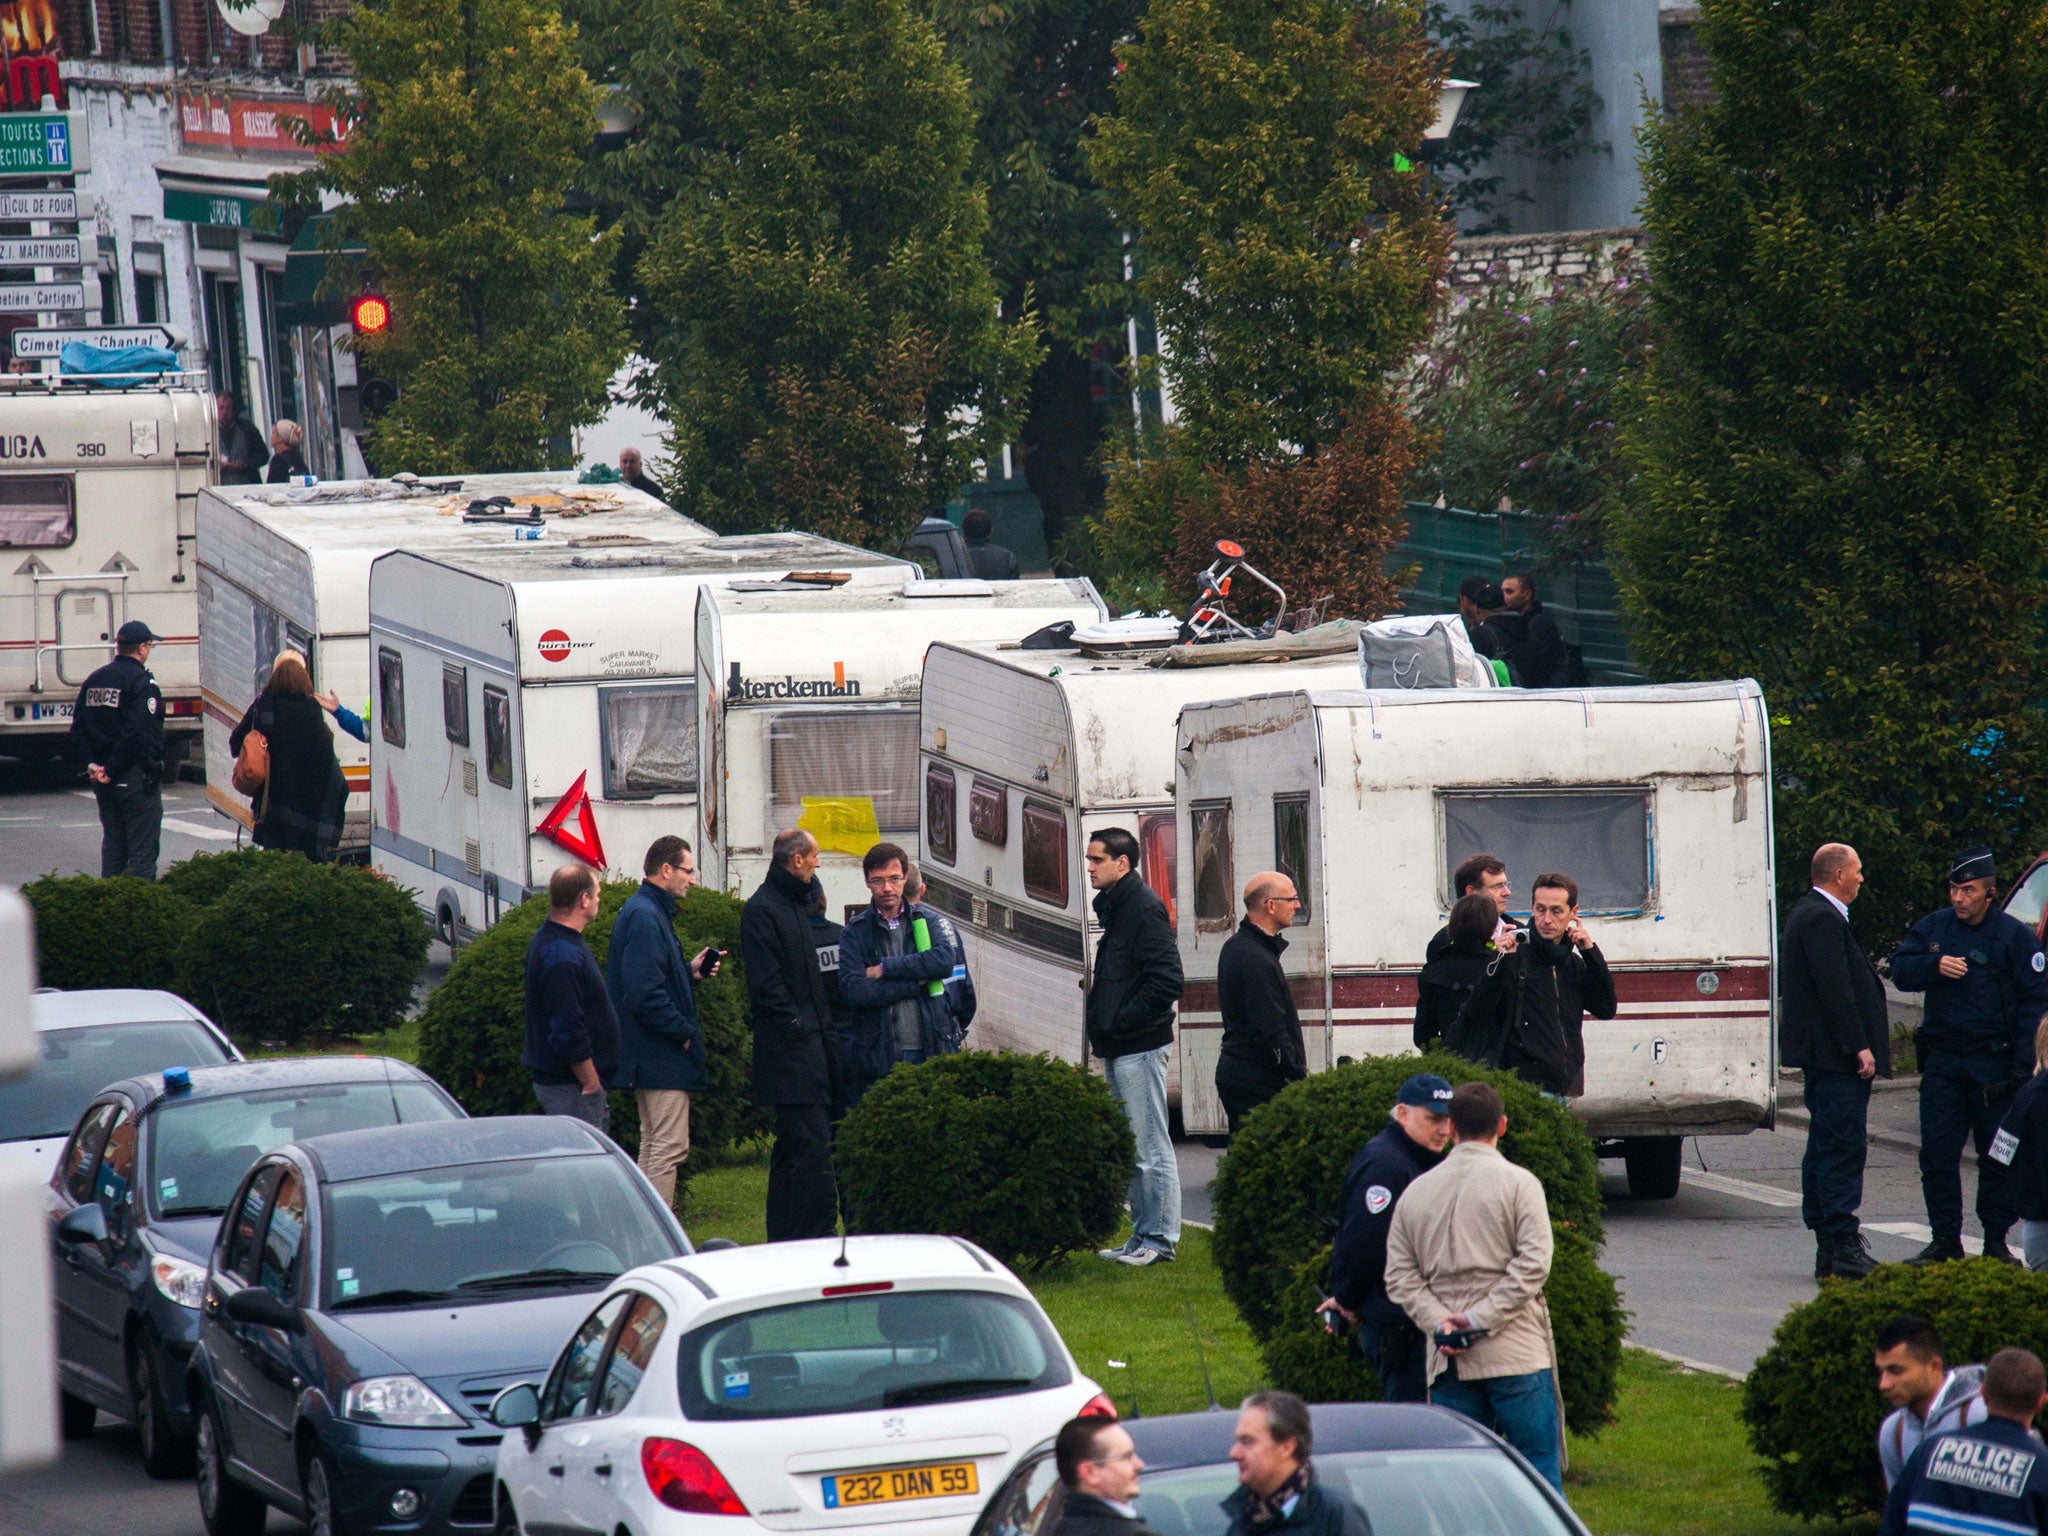 Security forces prepare to evacuate caravans belonging to the Roma community during the dismantling of a camp in Roubaix